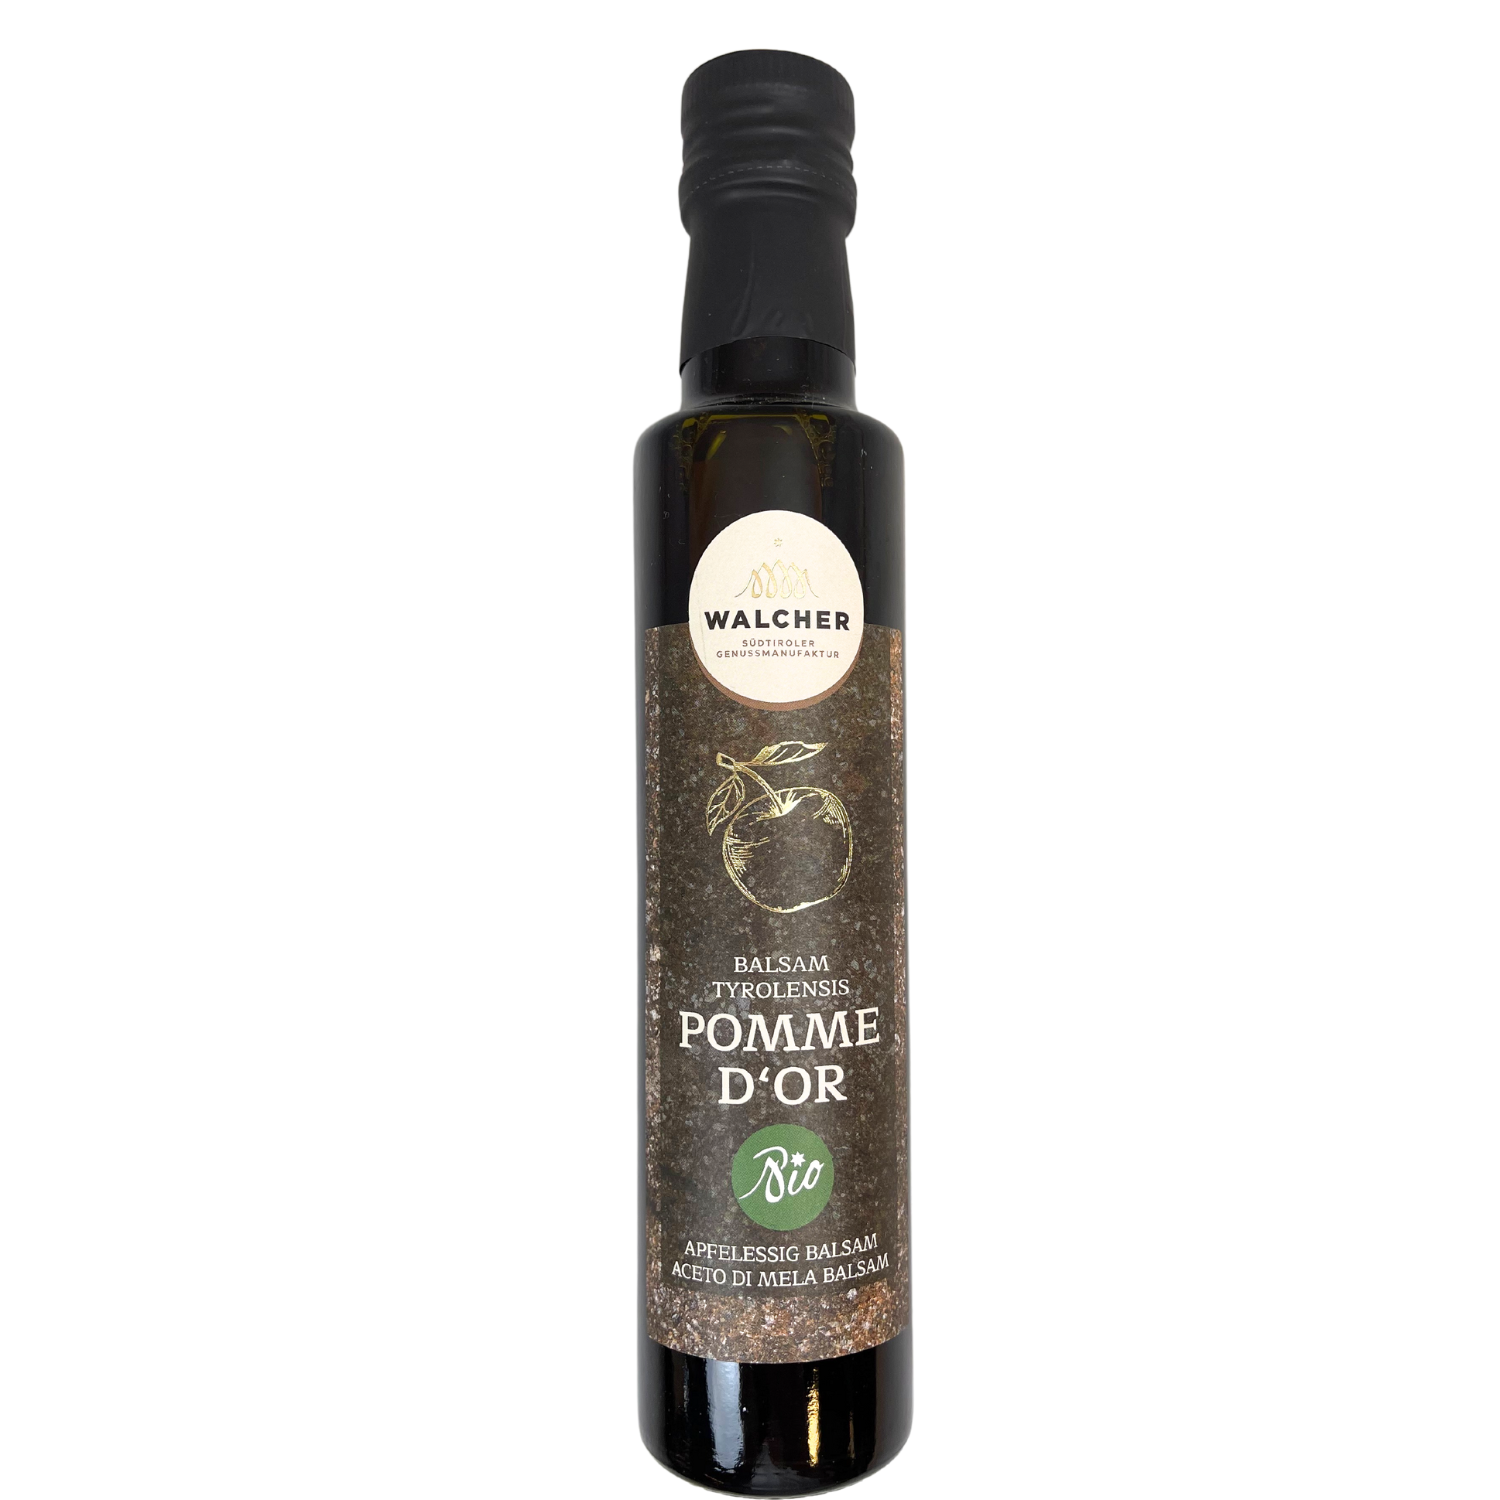 Aceto balsam tyrolensis POMME D'OR 250ml